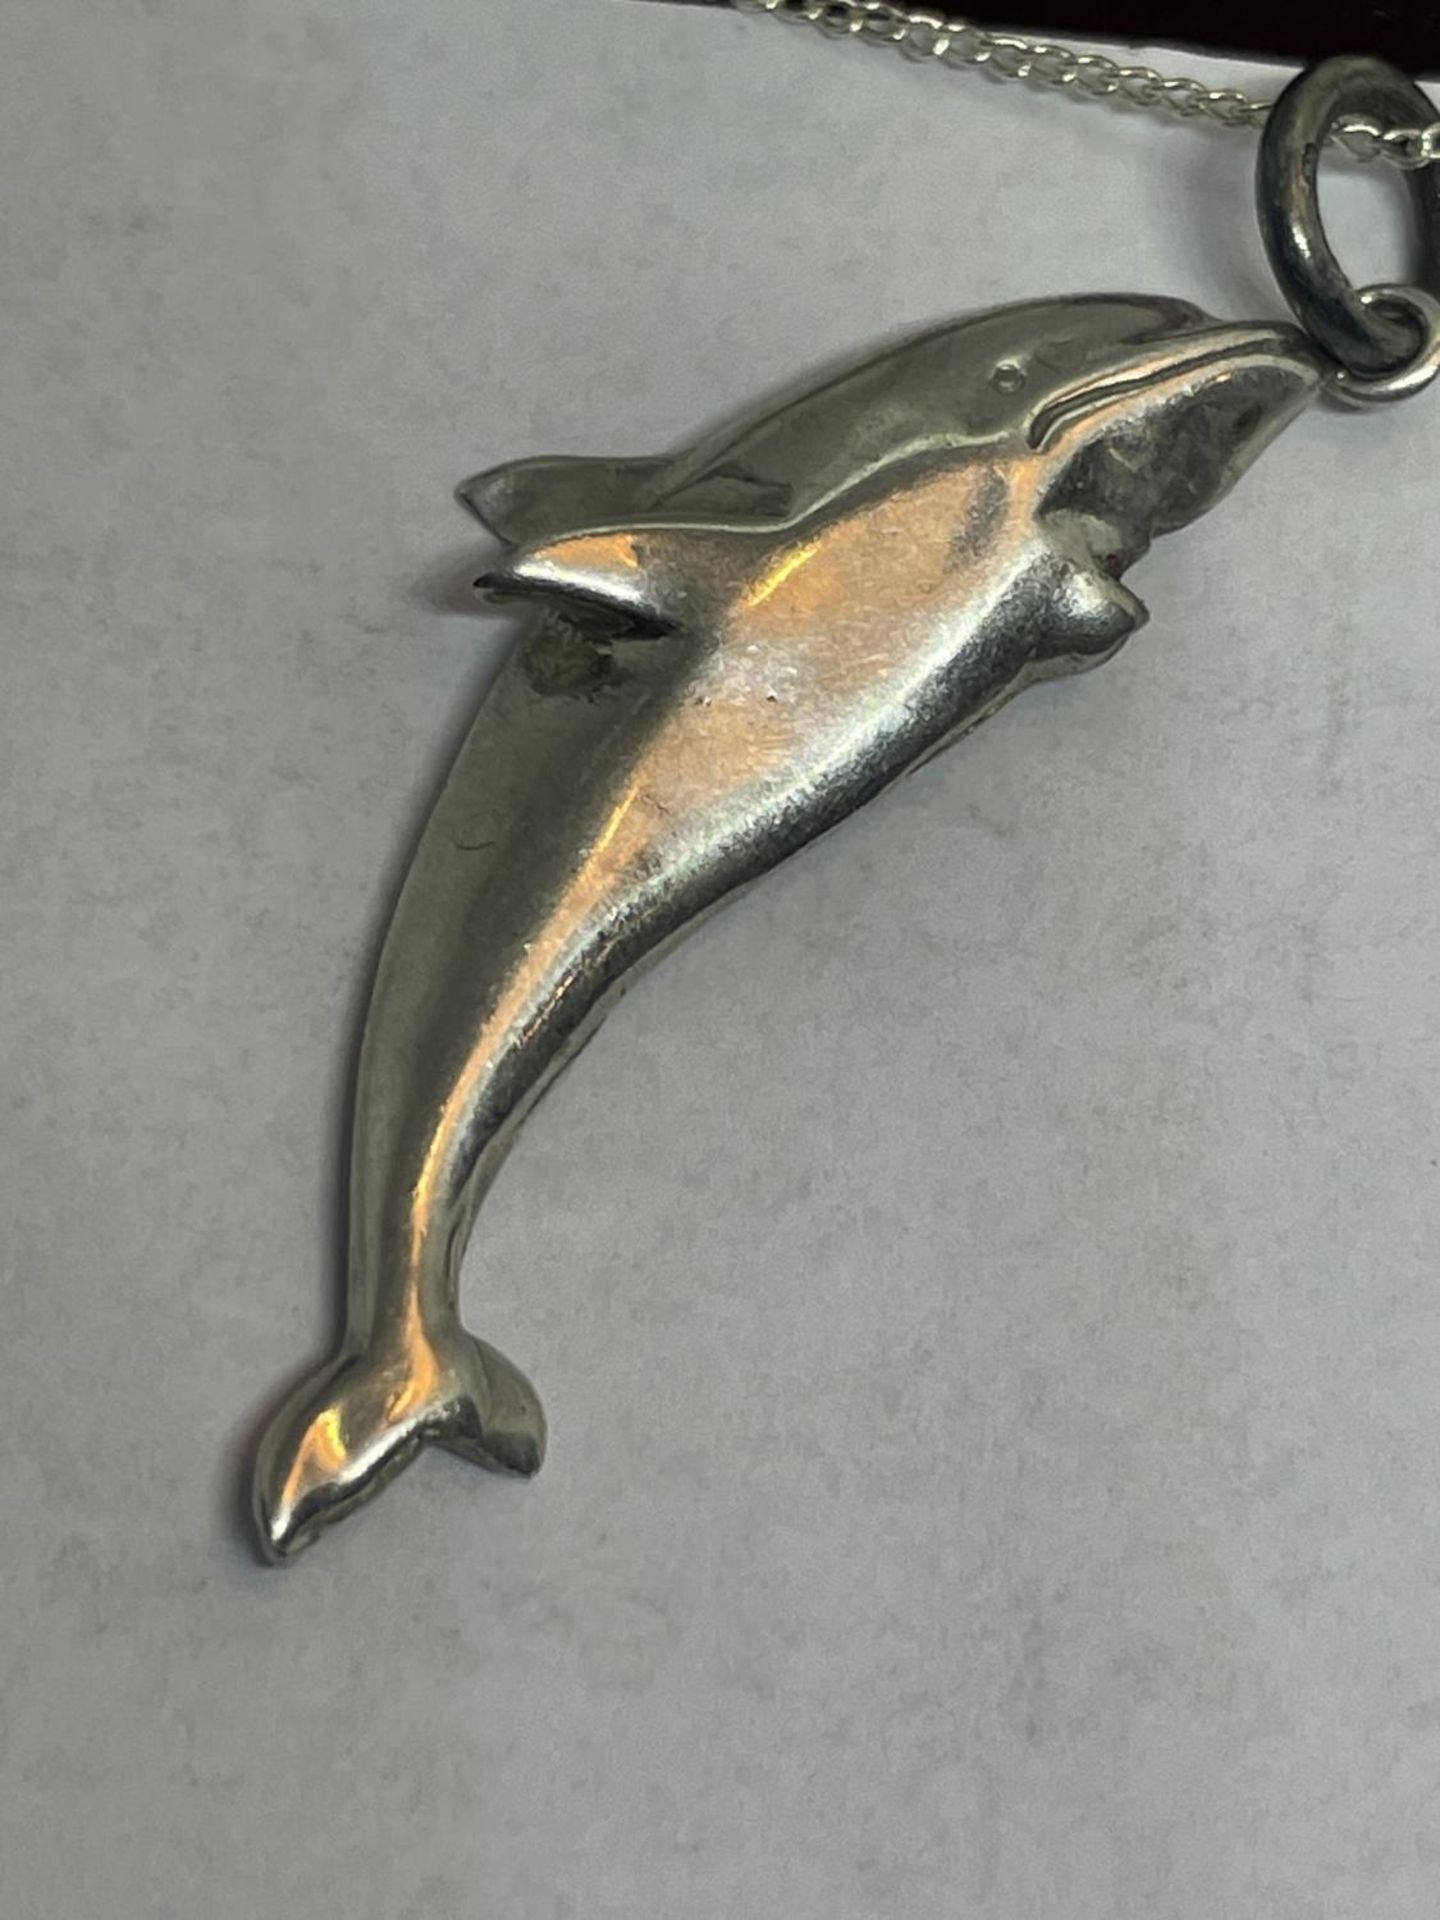 A SILVER NECKLACE WITH DOLPHIN PENDANT IN A PRESENTATION BOX - Image 2 of 2